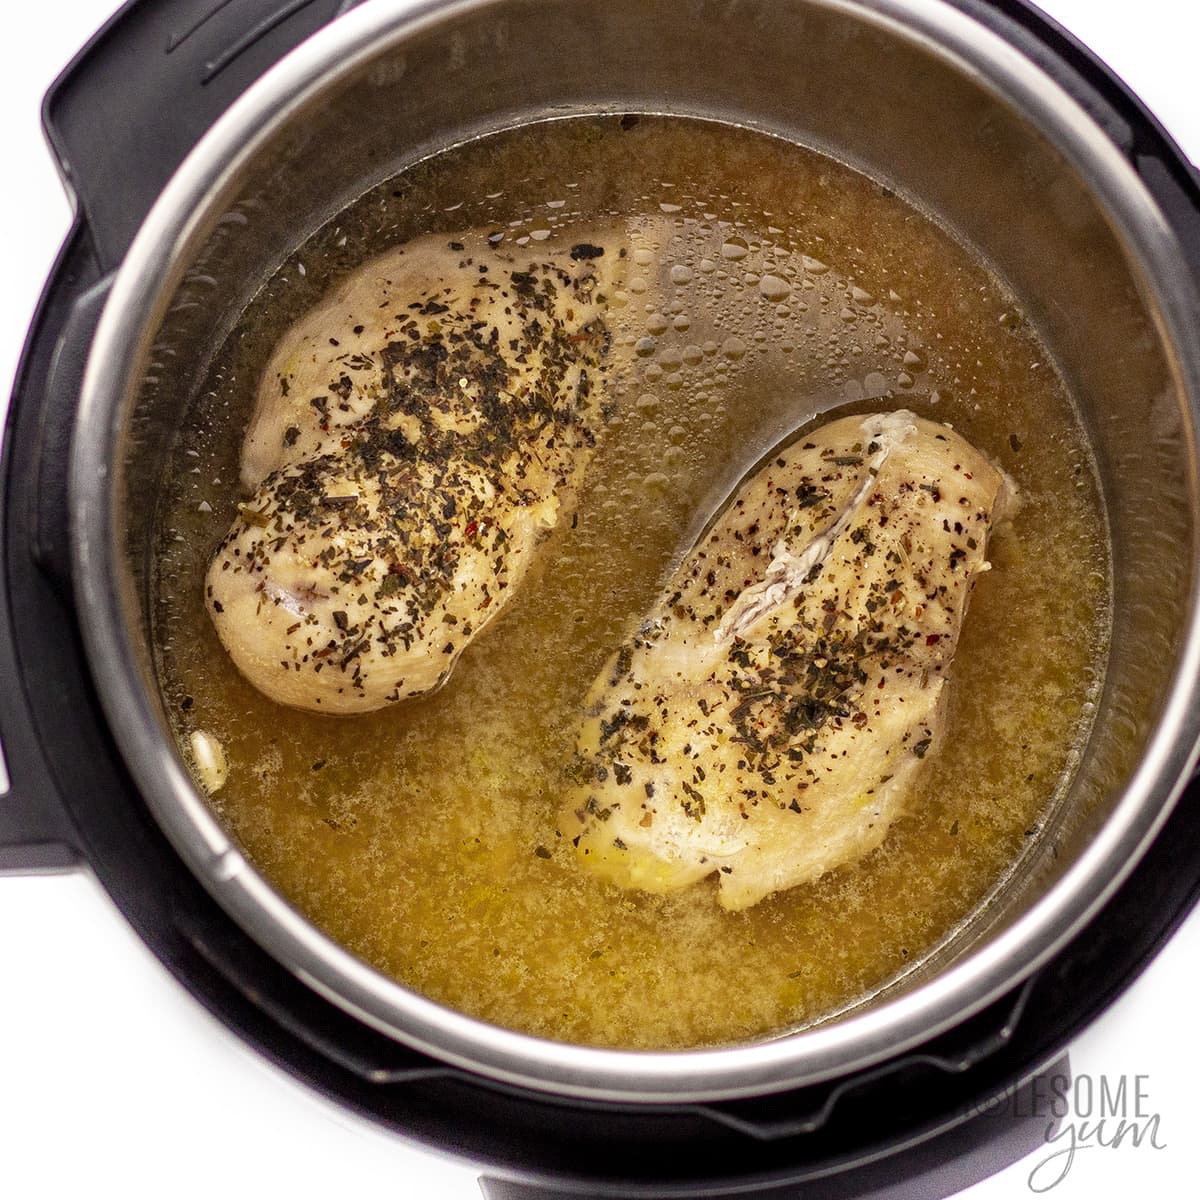 Cooked chicken breast in the Instant Pot.